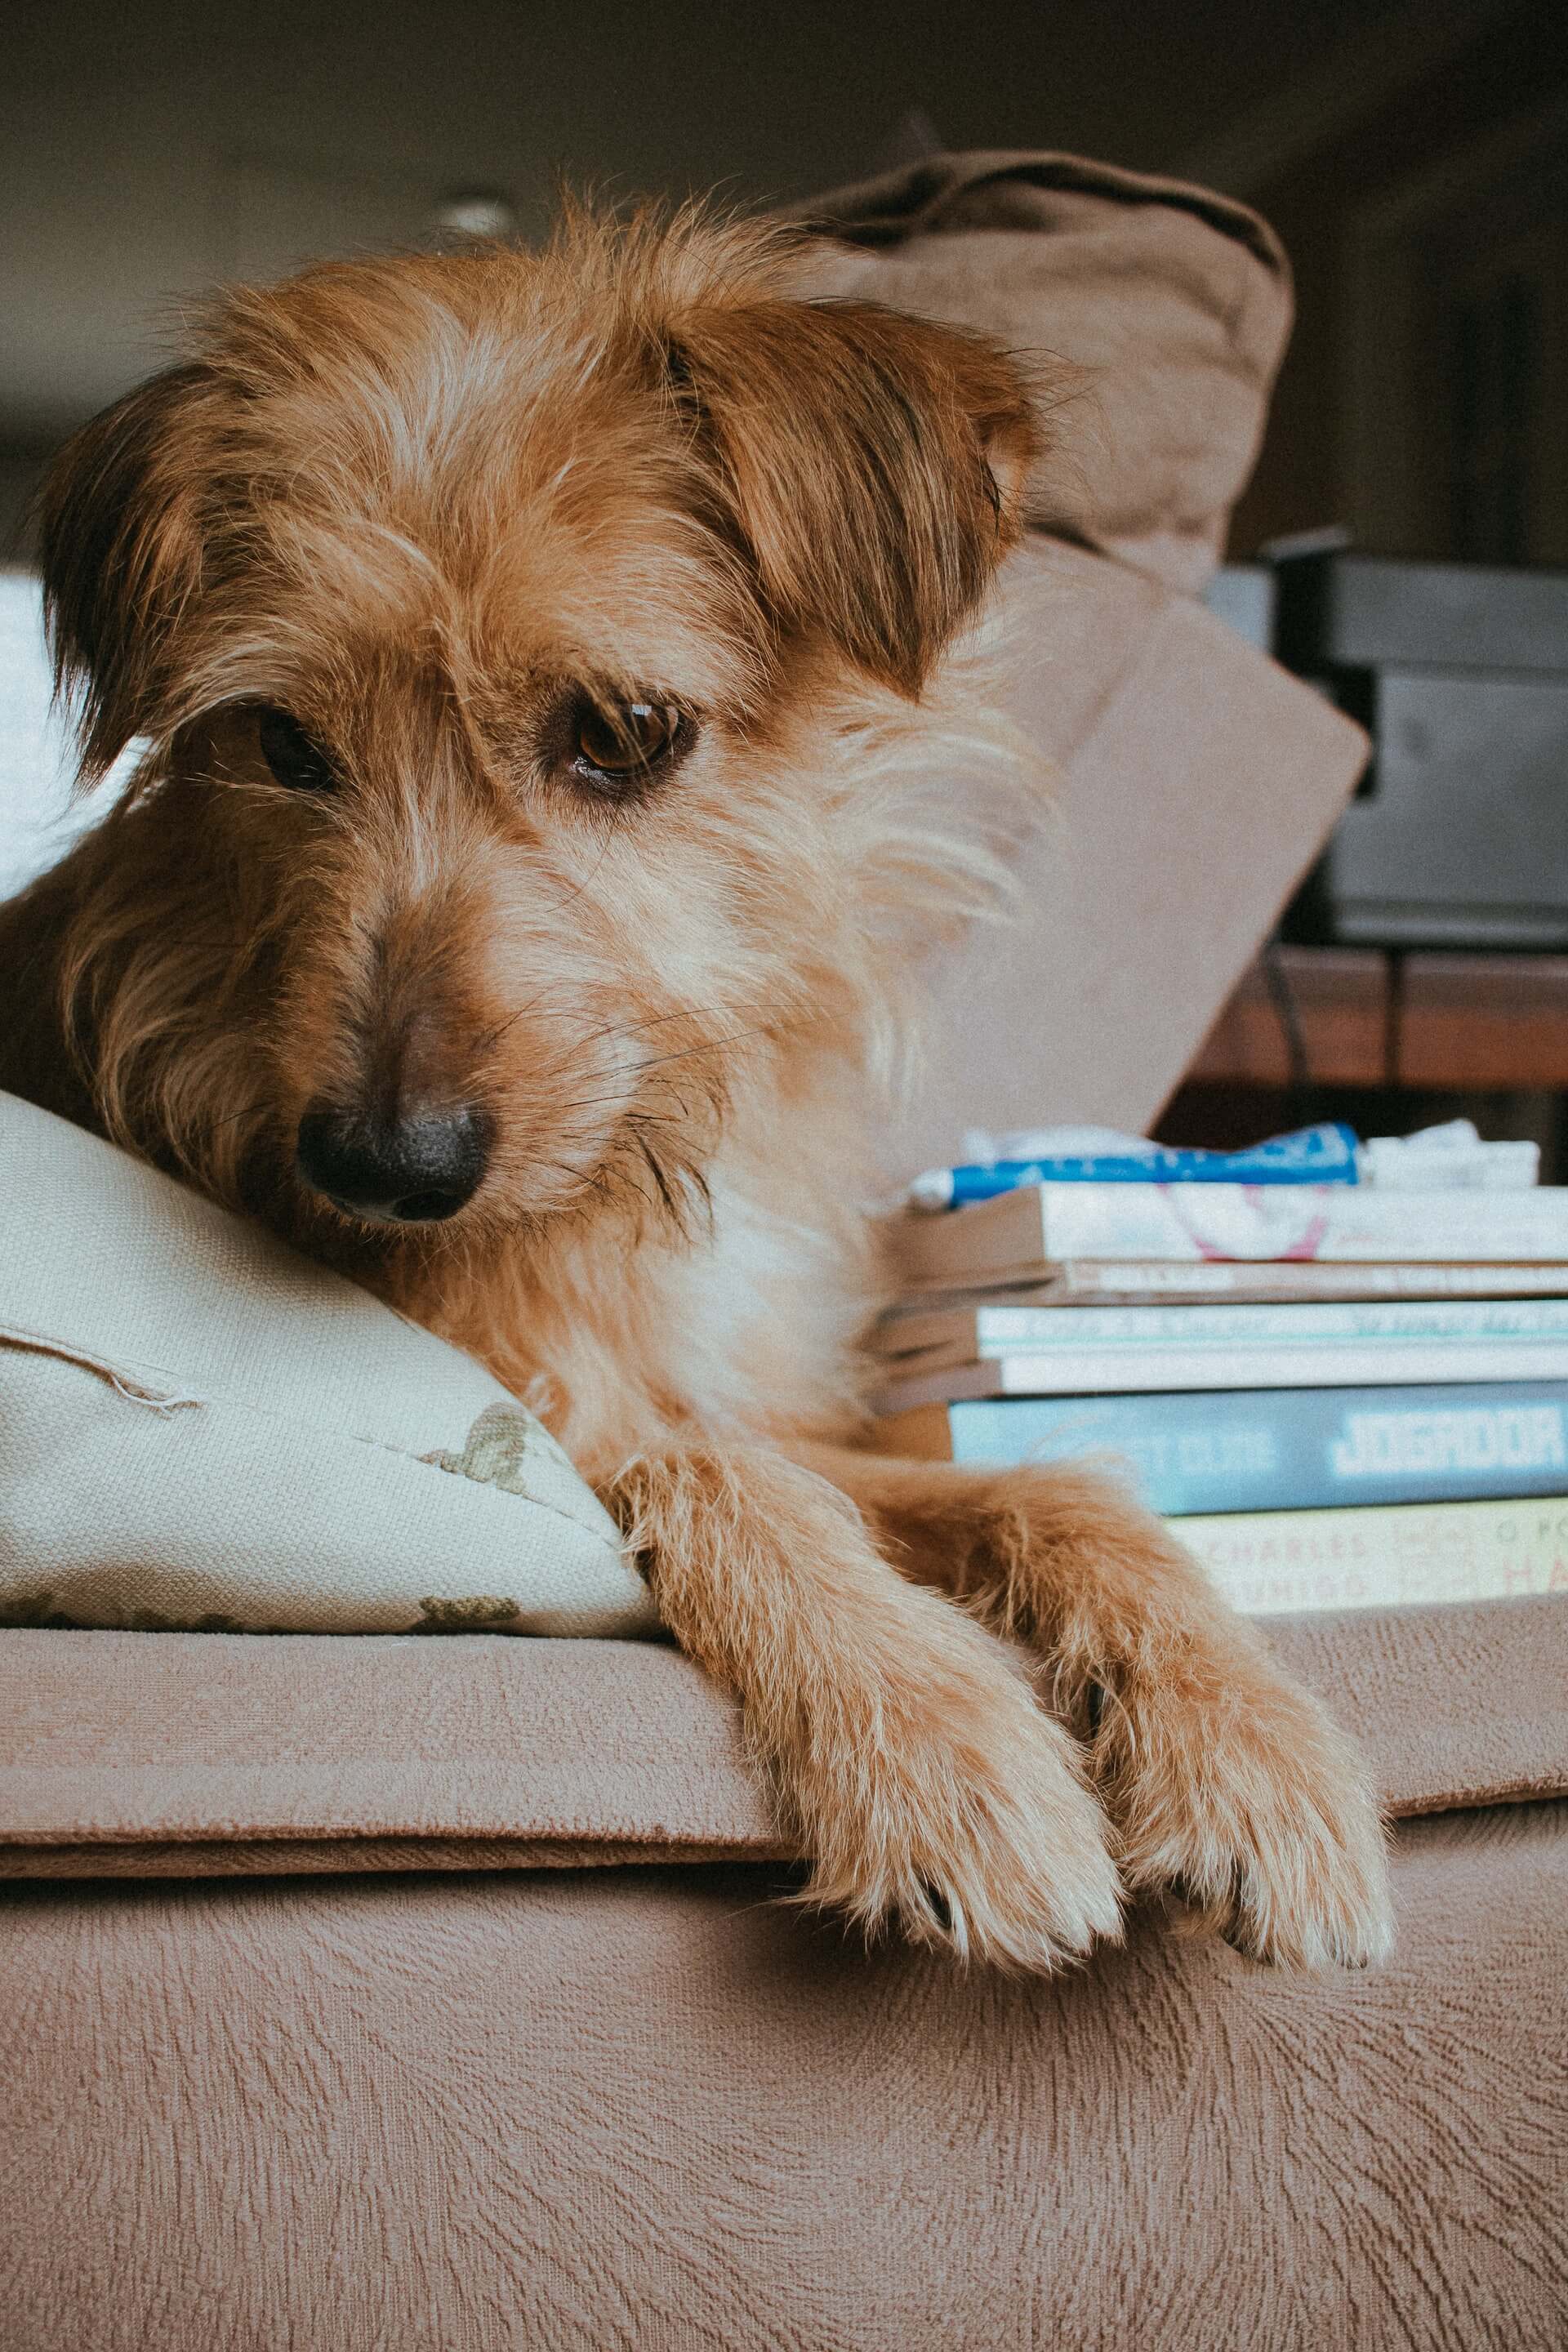 norfolk terrier resting on a surface next to a stack of books